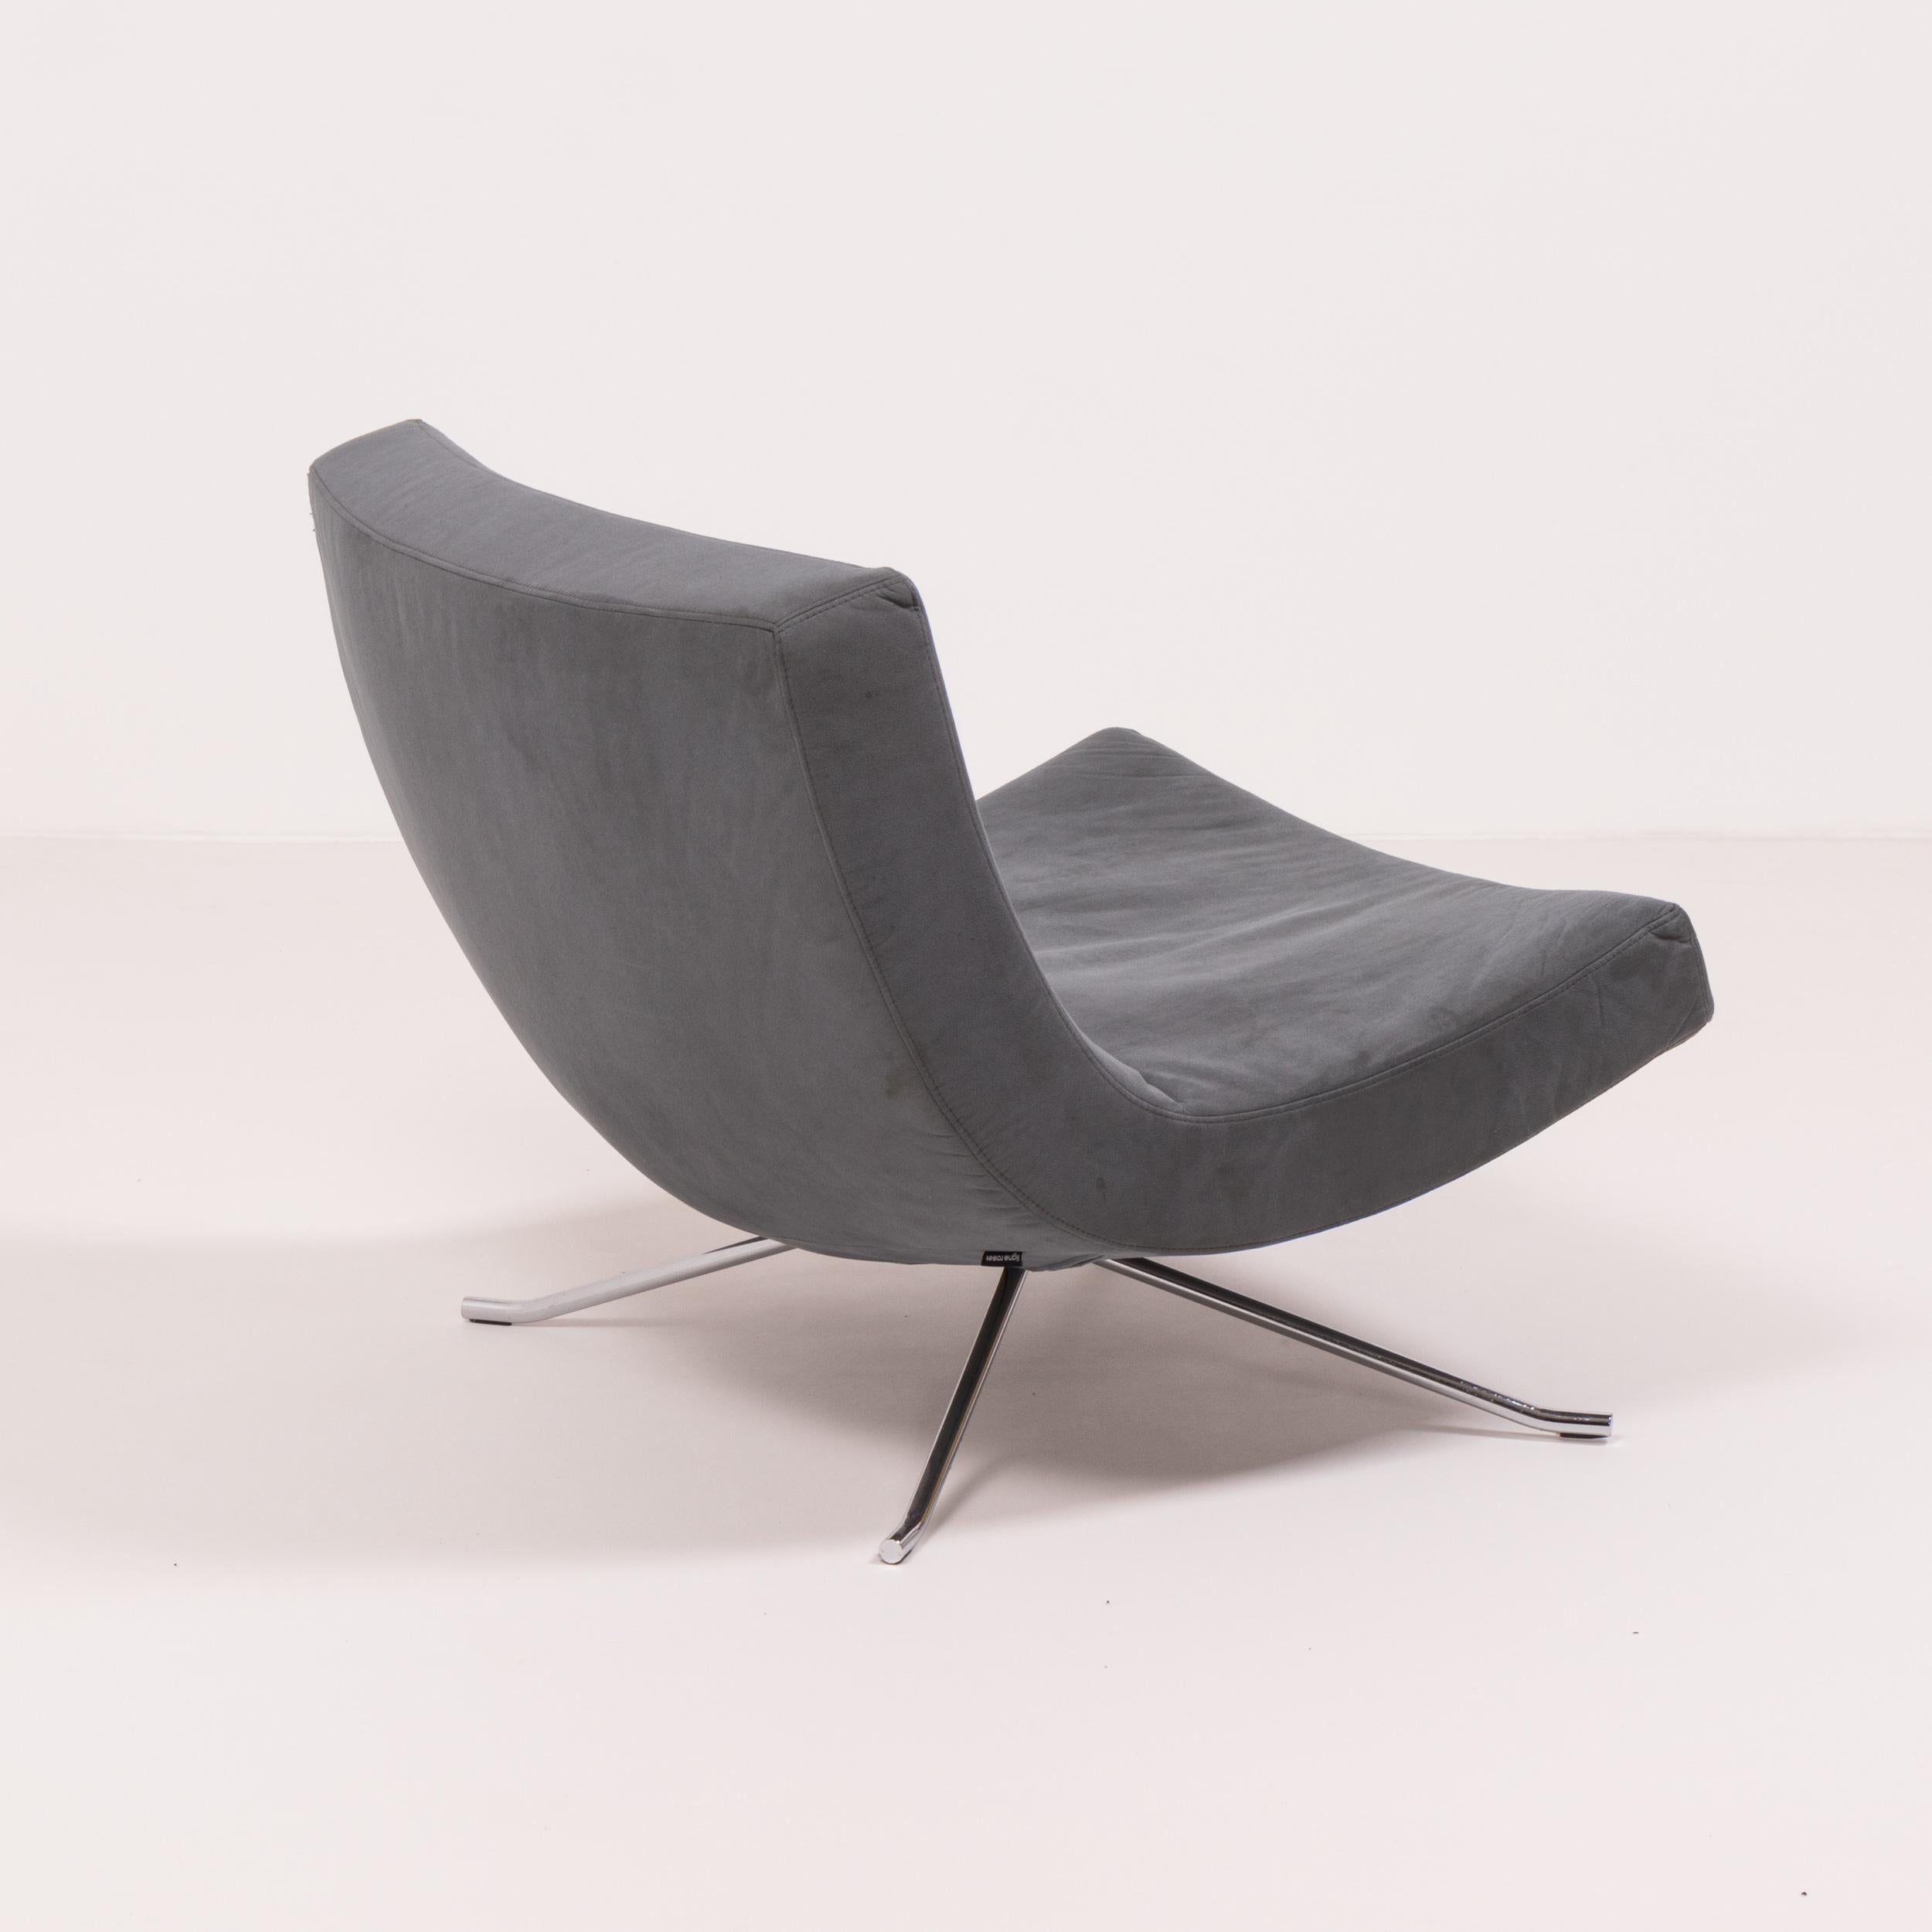 Originally designed by Christian Werner in 2001, the Pop chair combines soft curves with sleek Industrial lines.
 
Upholstered in grey Alacantara fabric, the chairs have Butlex padded seats for ultimate comfort.
 
Featuring sculptural chrome